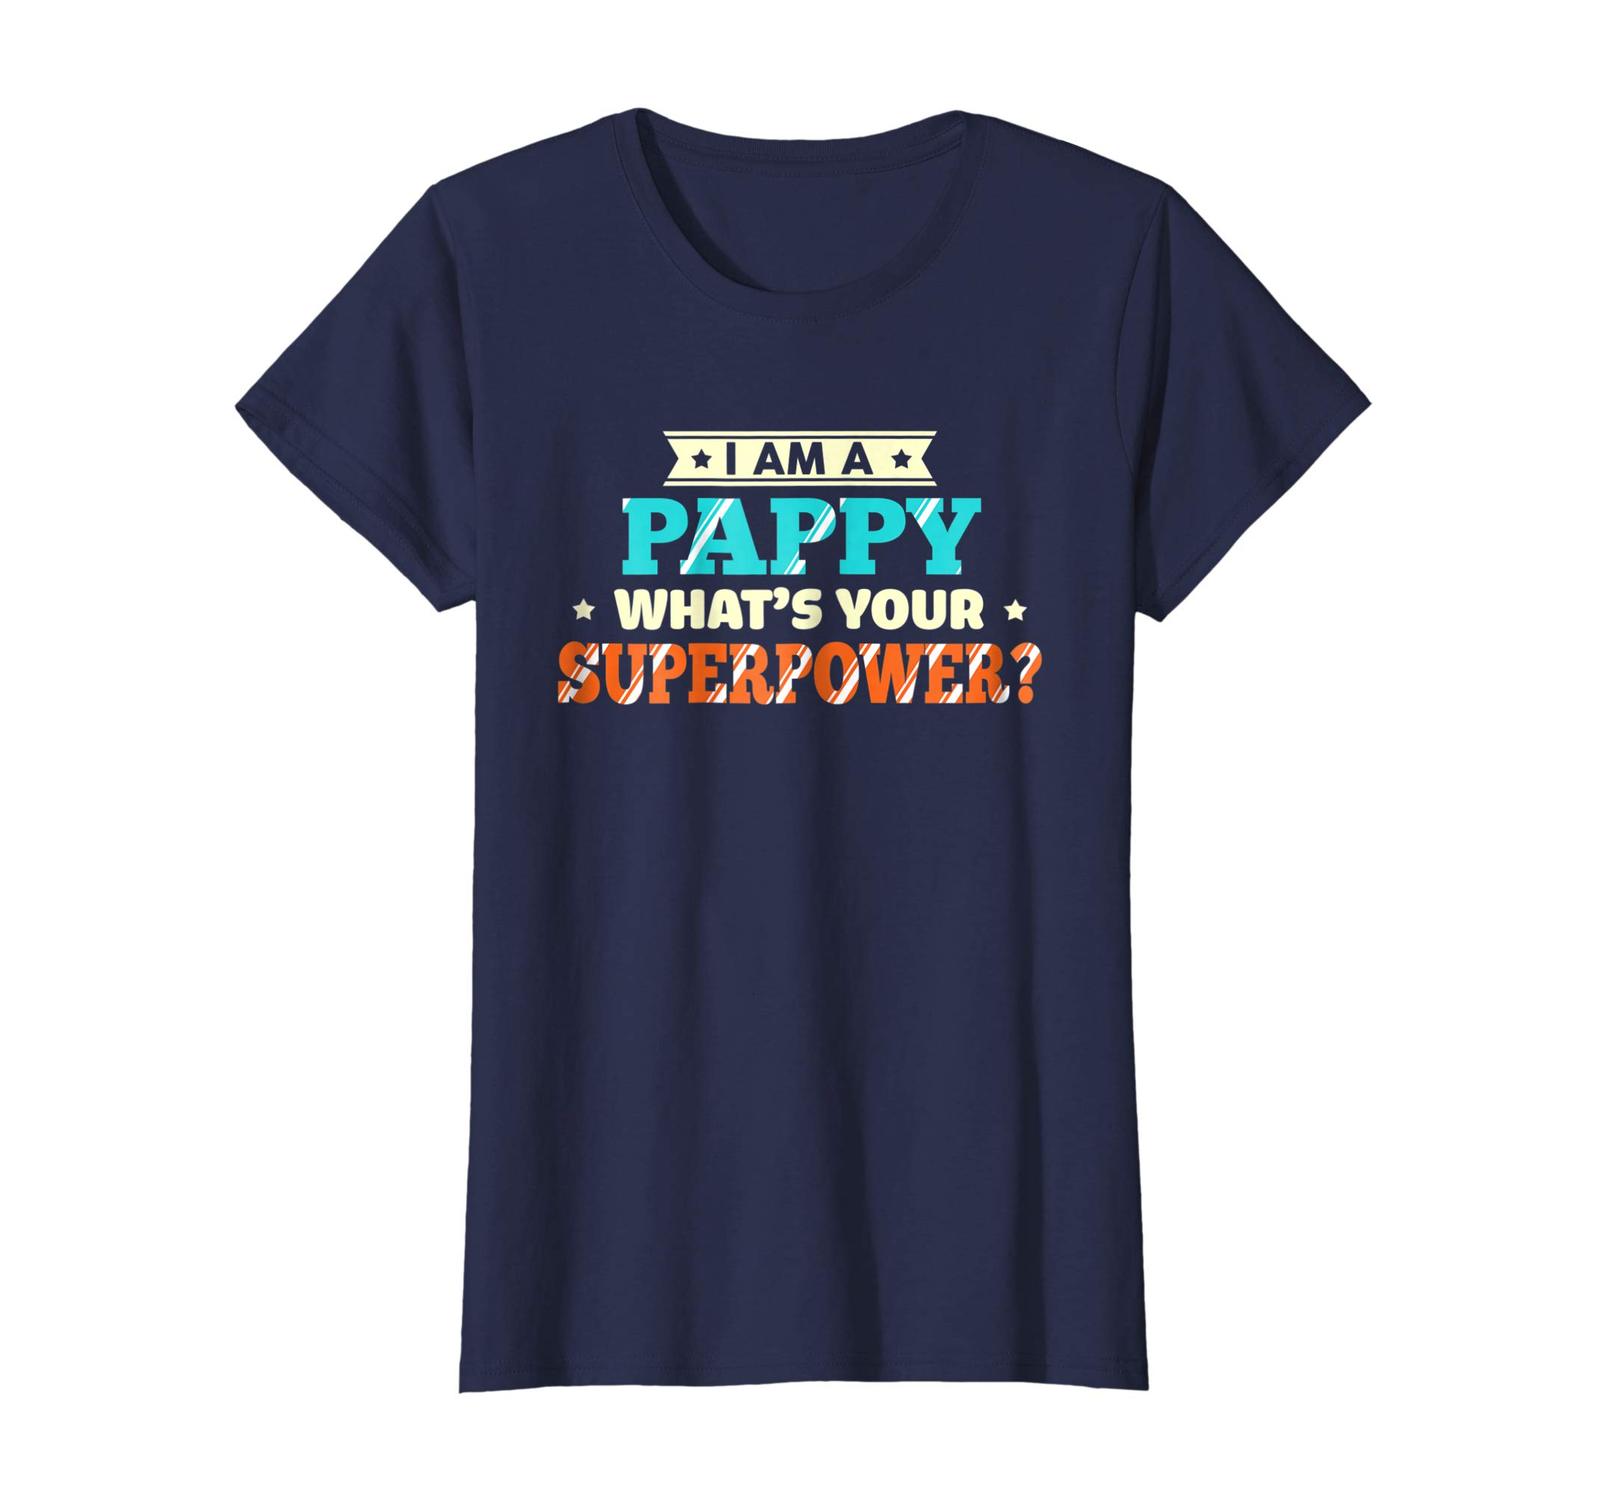 Tee shirts - I am Pappy What's Superpower Superhero Funny T Shirt Gift ...